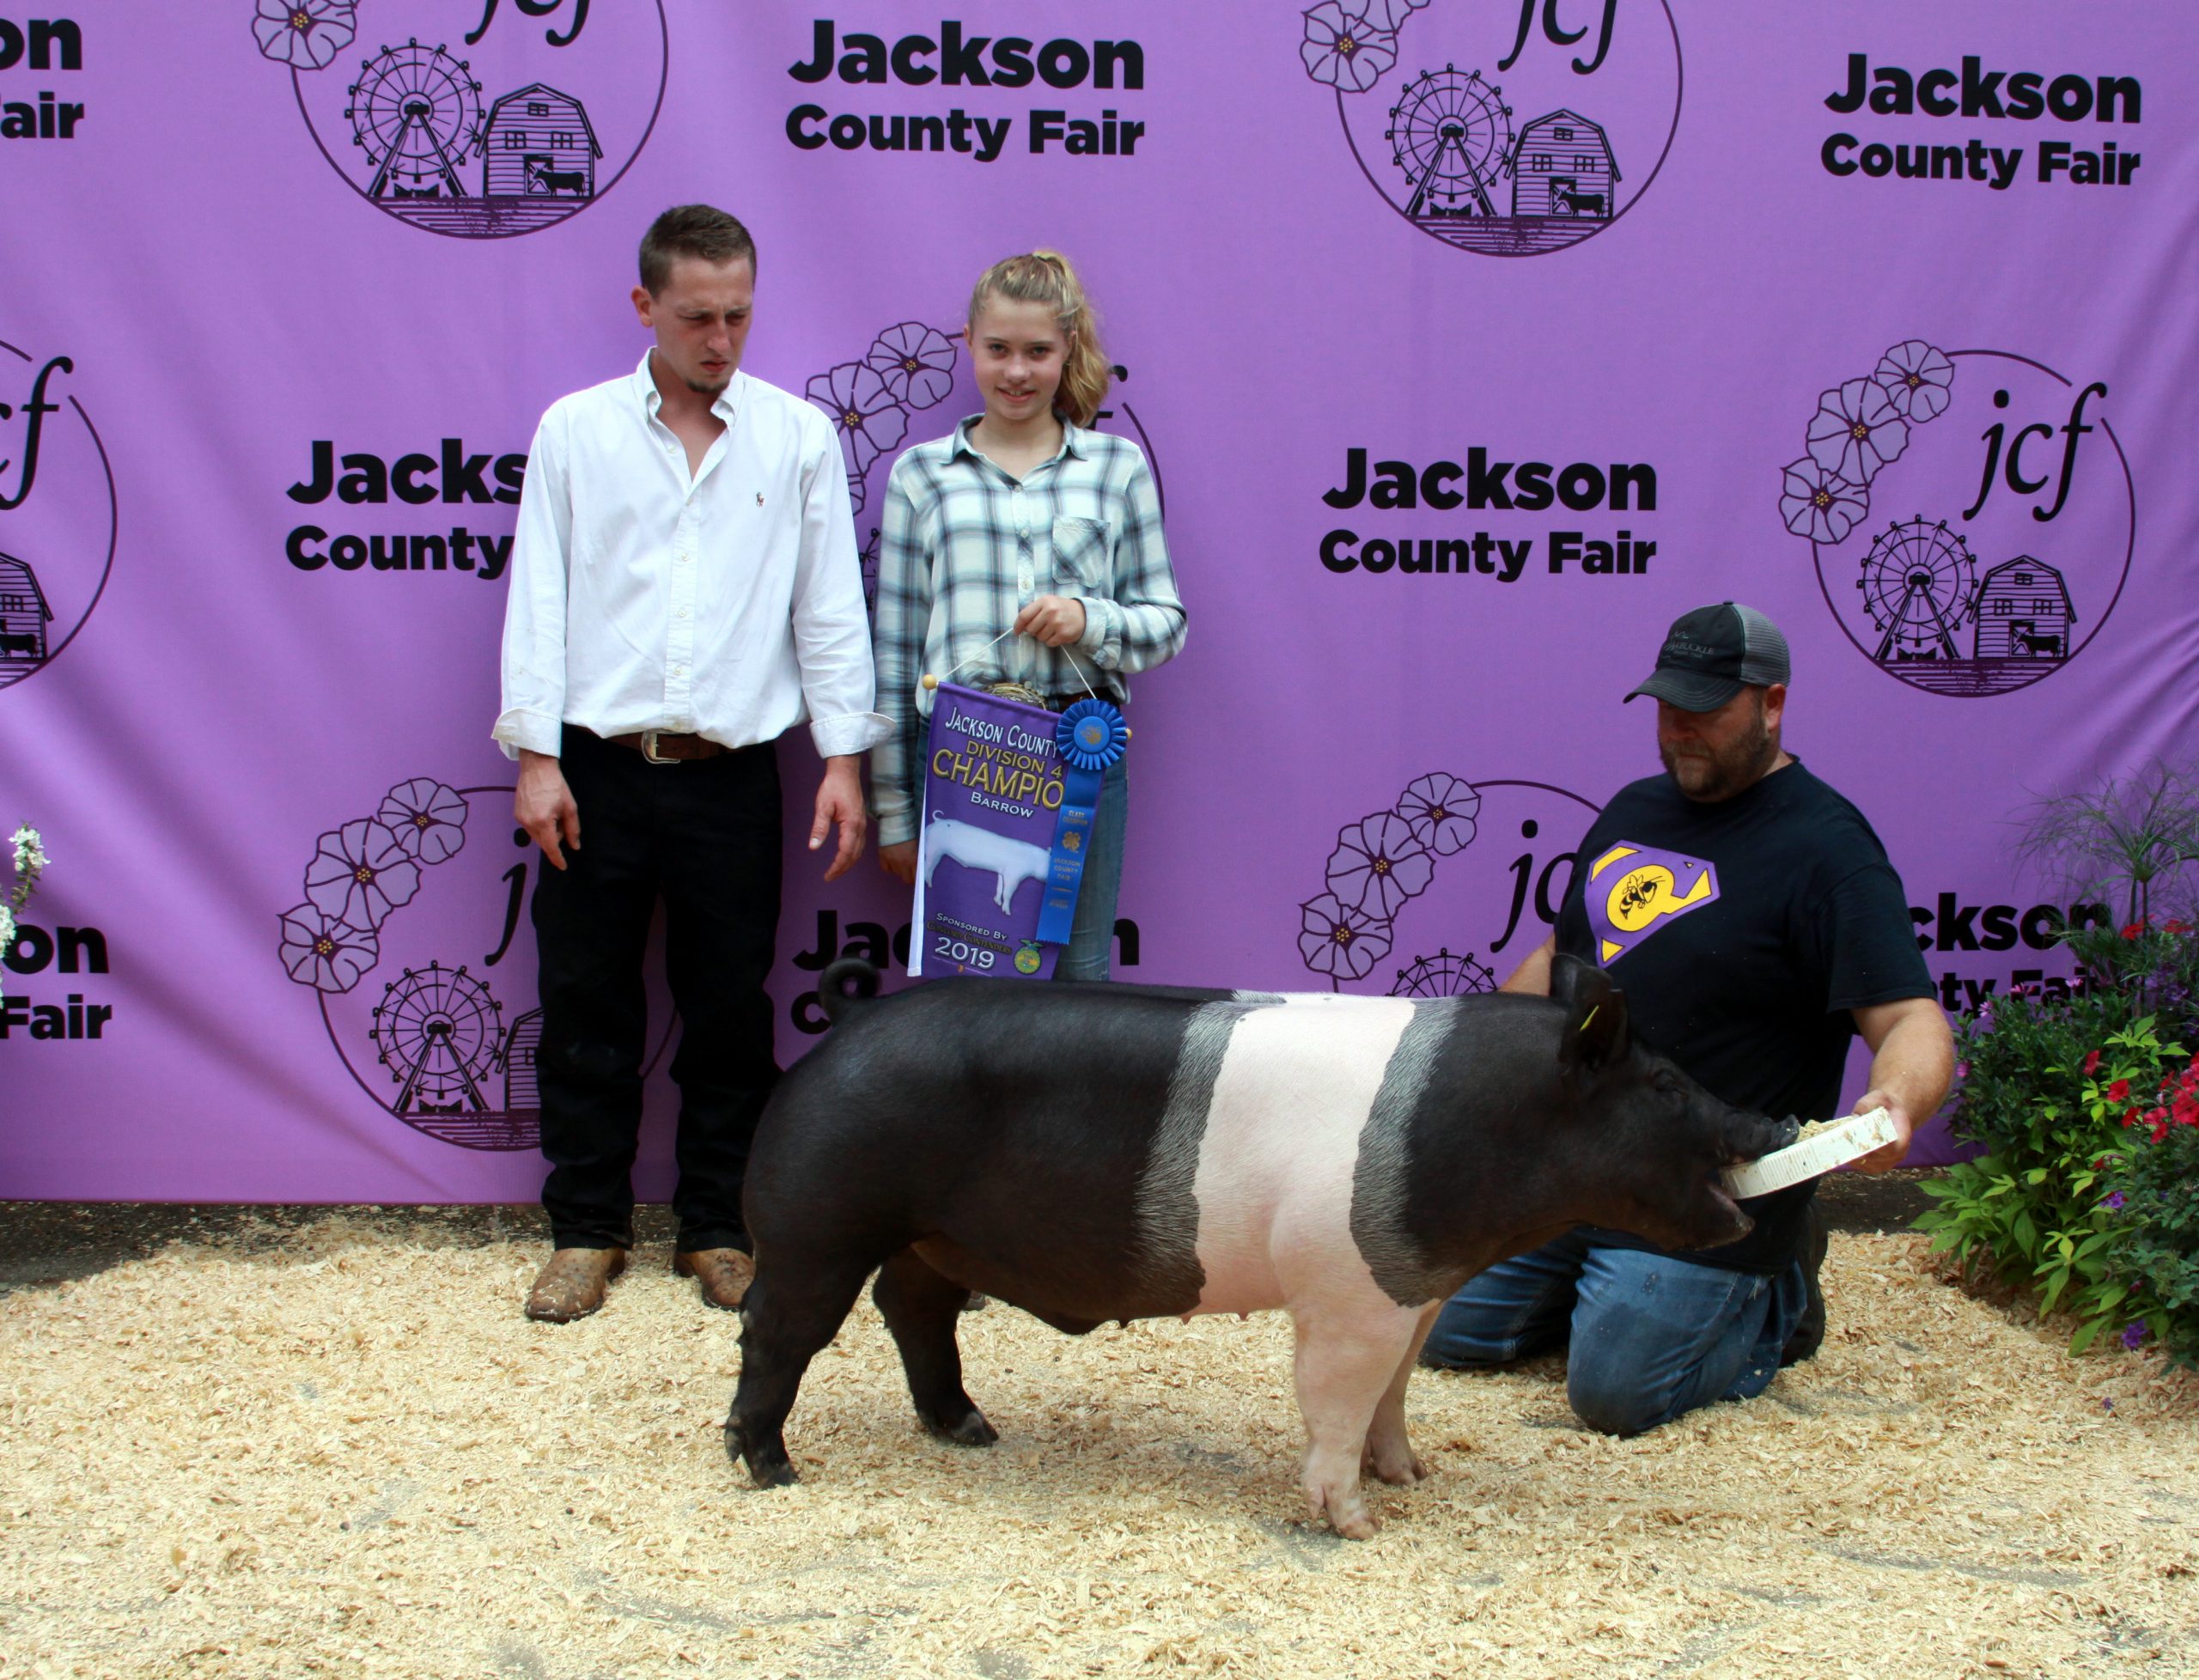 Jackson County Fair, Division 4 Champion Barrow, Sired by Keg Stand